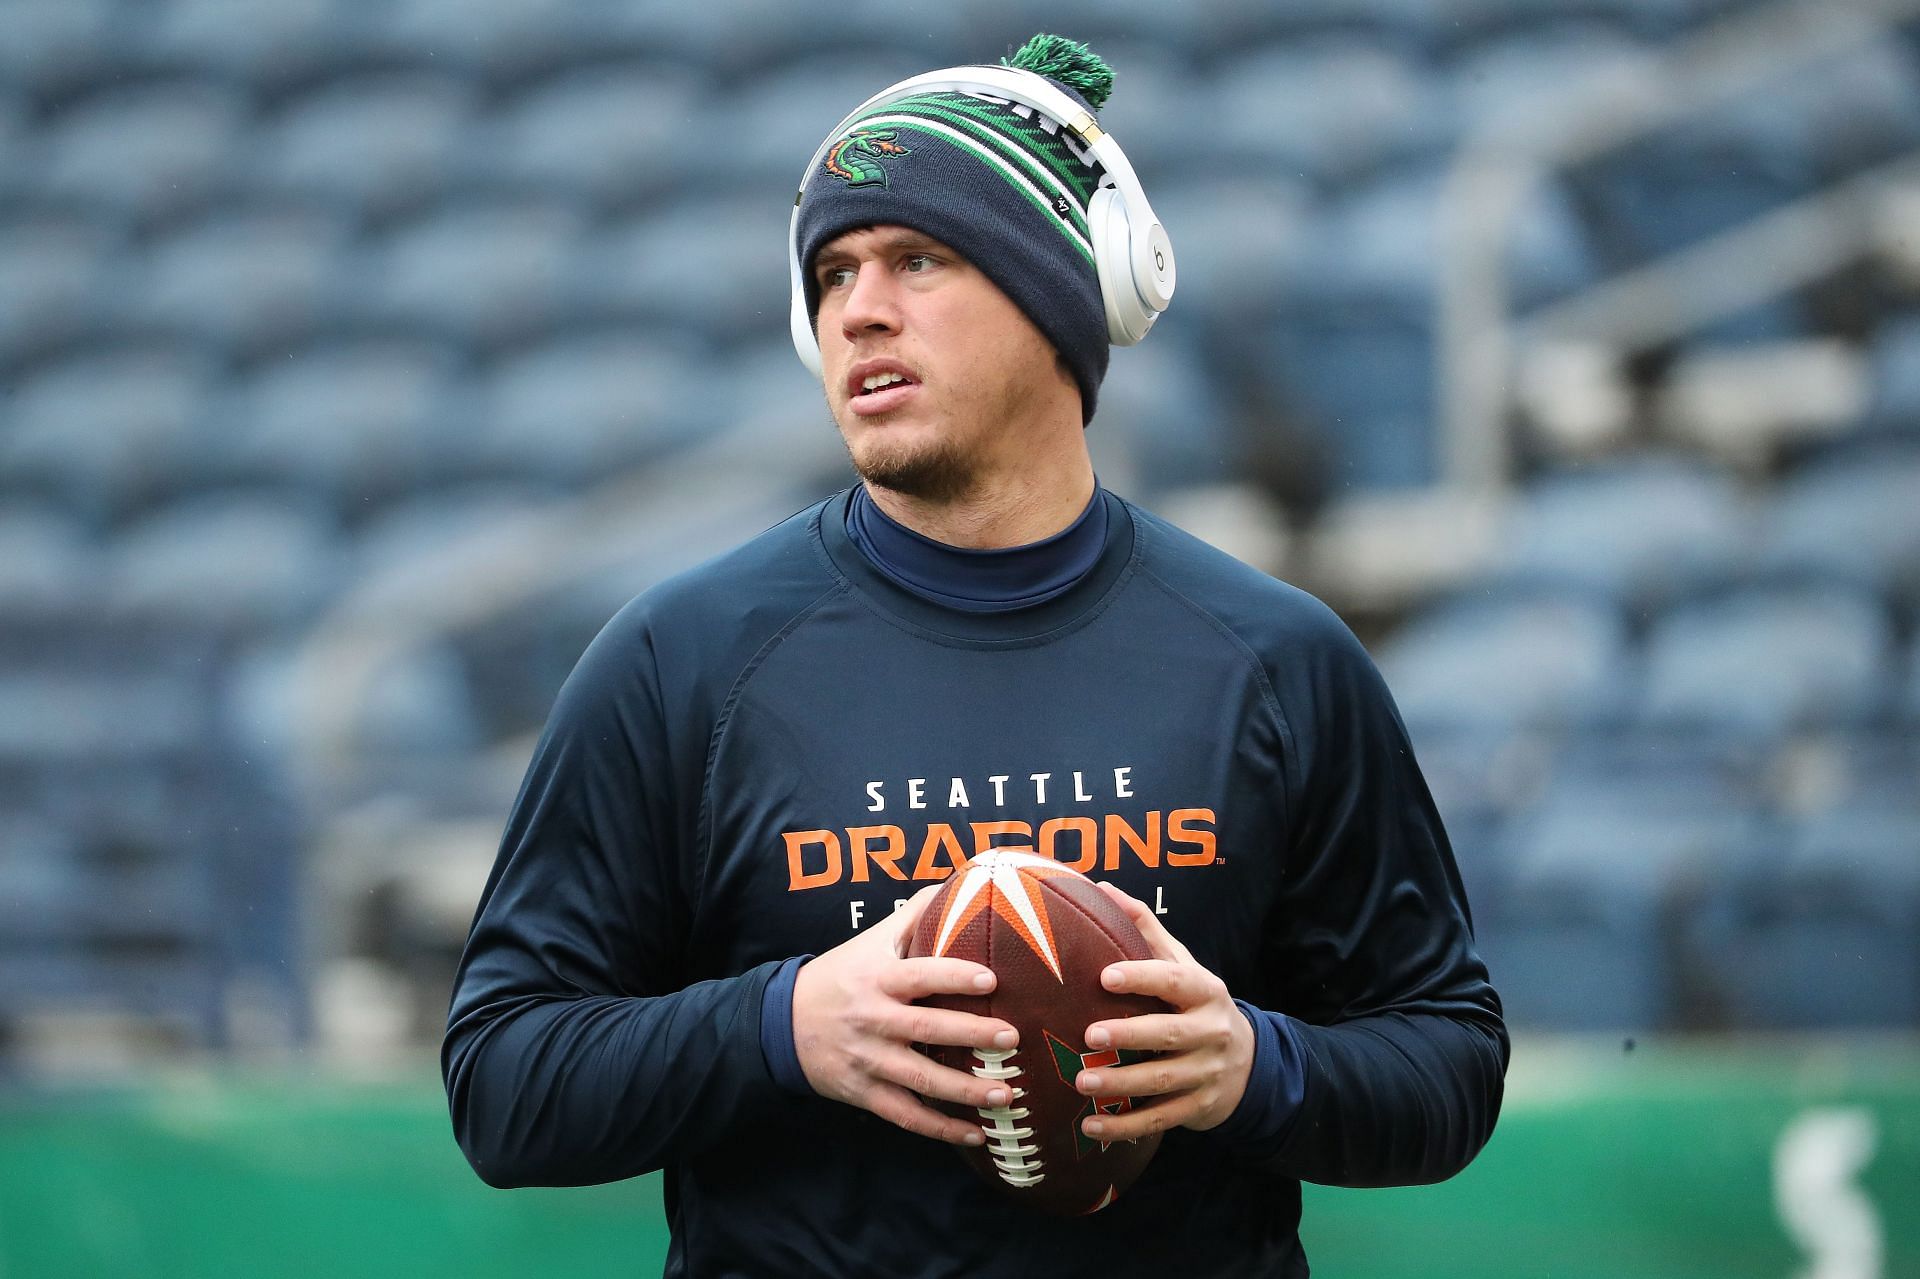 Brandon Silvers will start at quarterback for Seattle Dragons, who